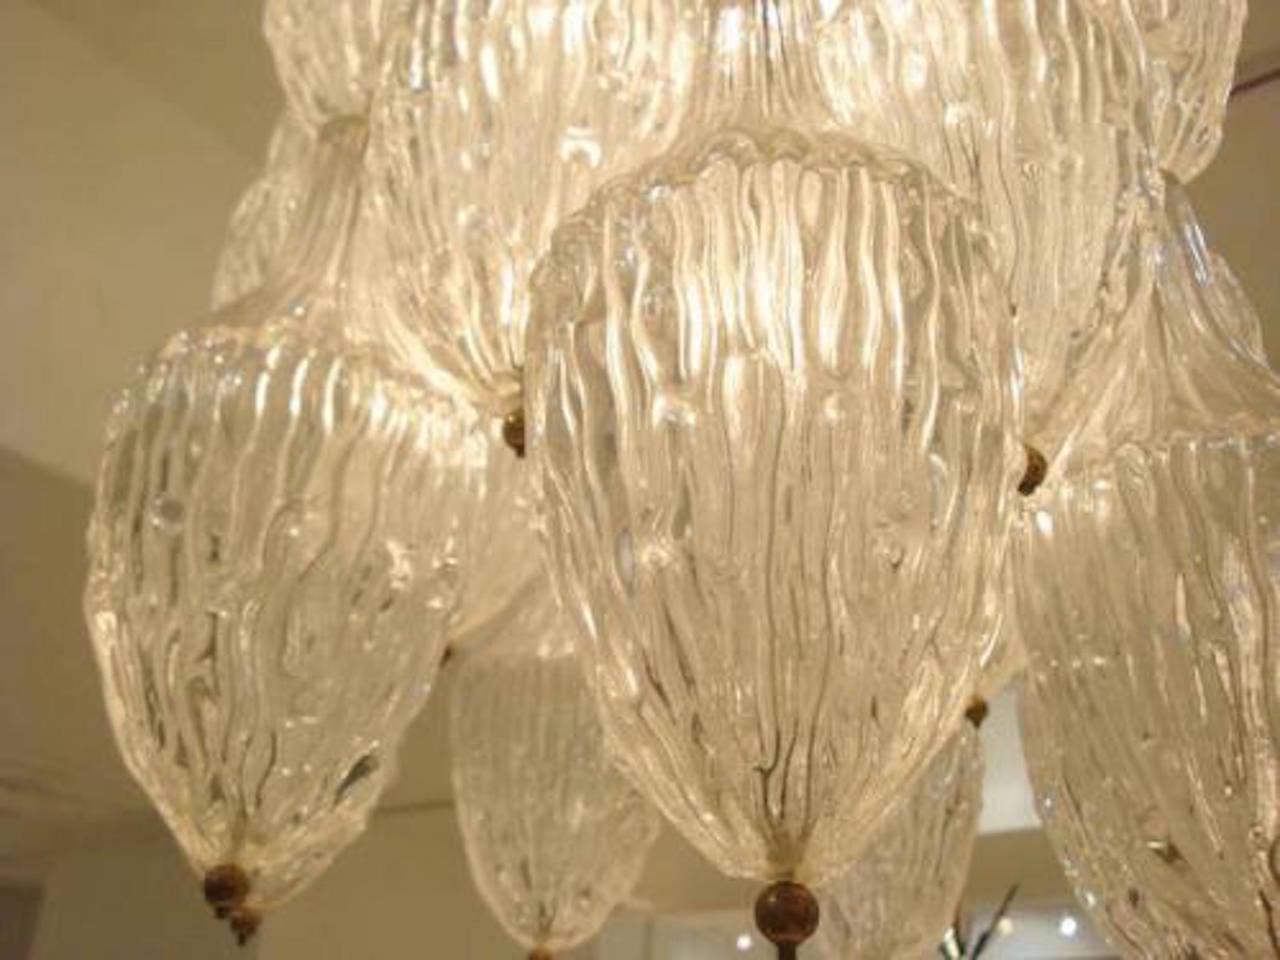 A chandelier featuring a body that consists of rows of handblown textured glass bottles that hang from a metal frame and act as a light diffuser for the inner lamps by Antonio Salviati, Italy, circa 1968.